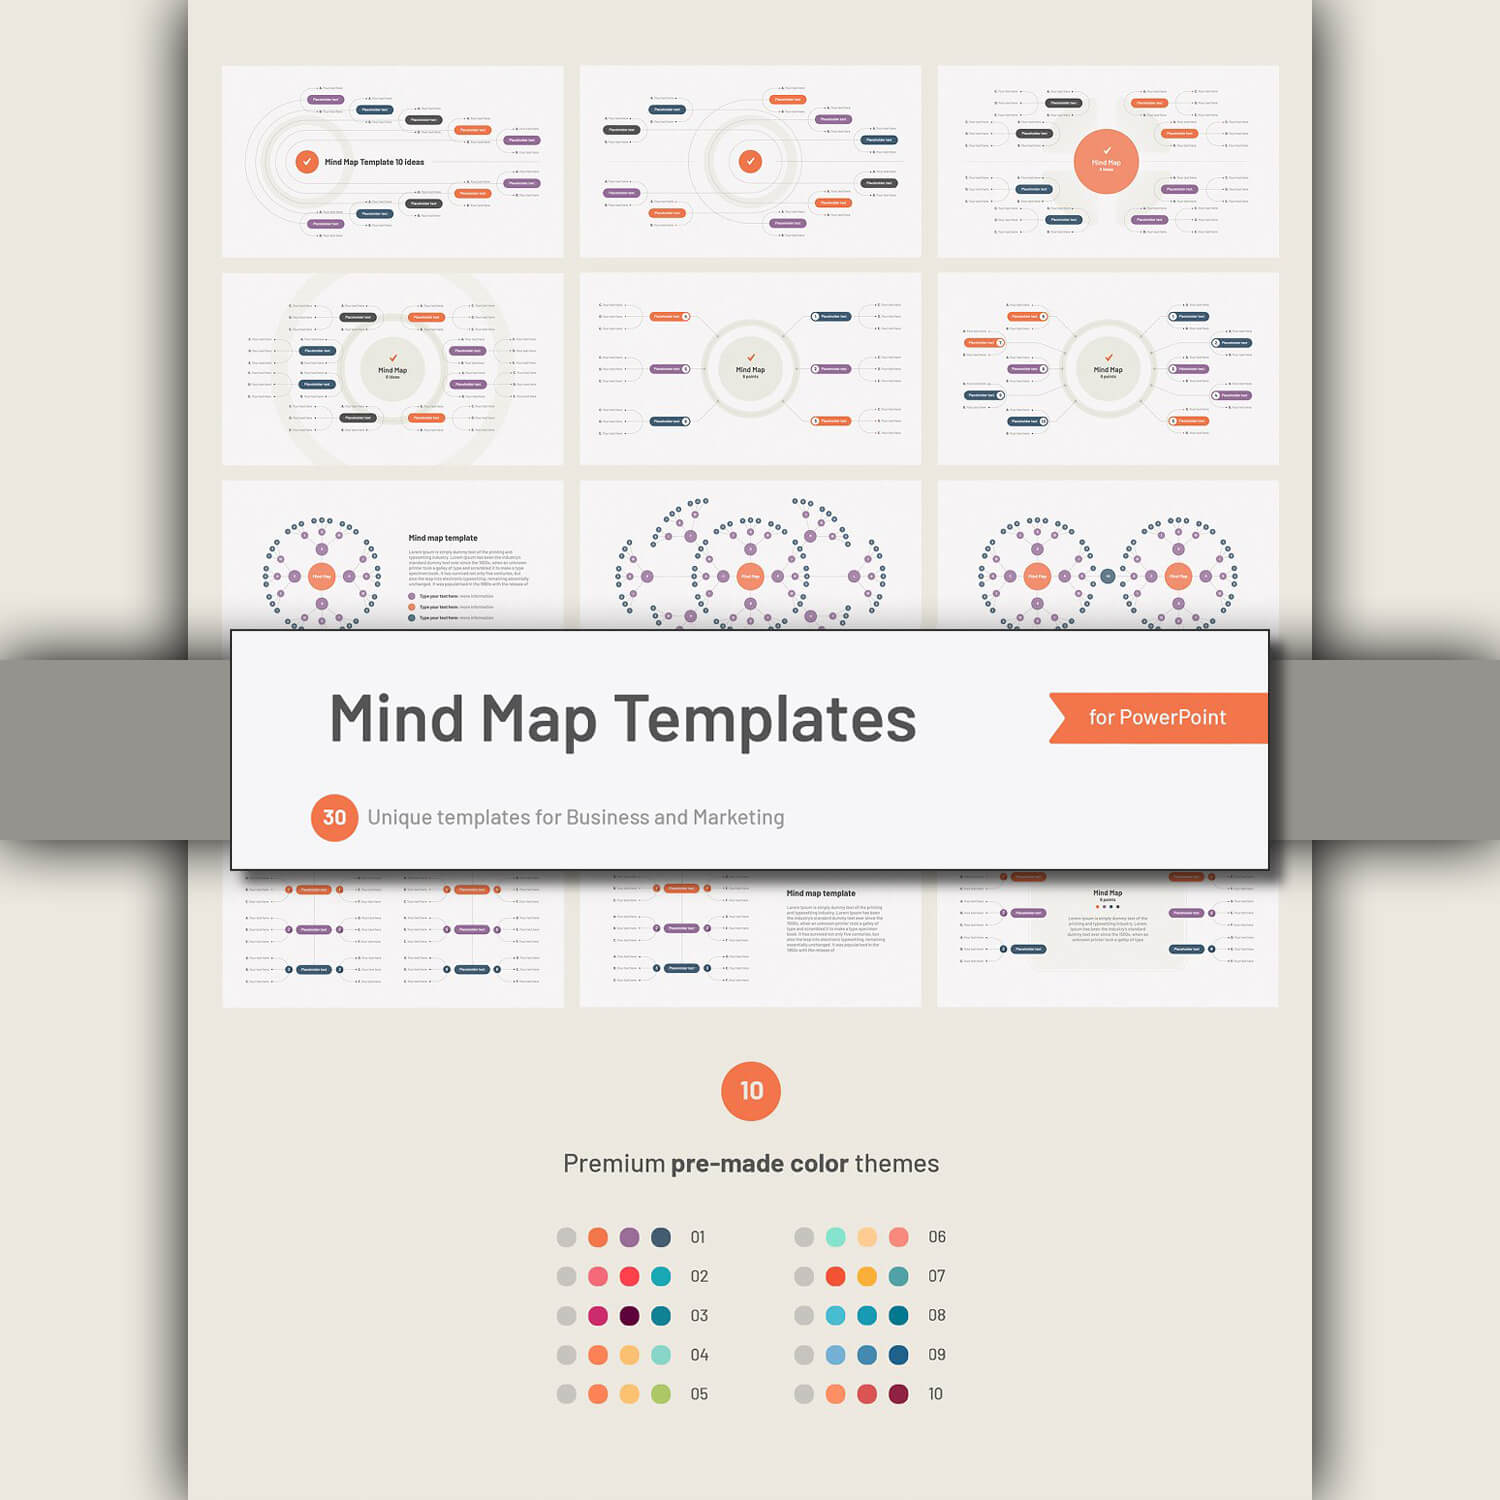 30 unique templates for Business and Marketing.